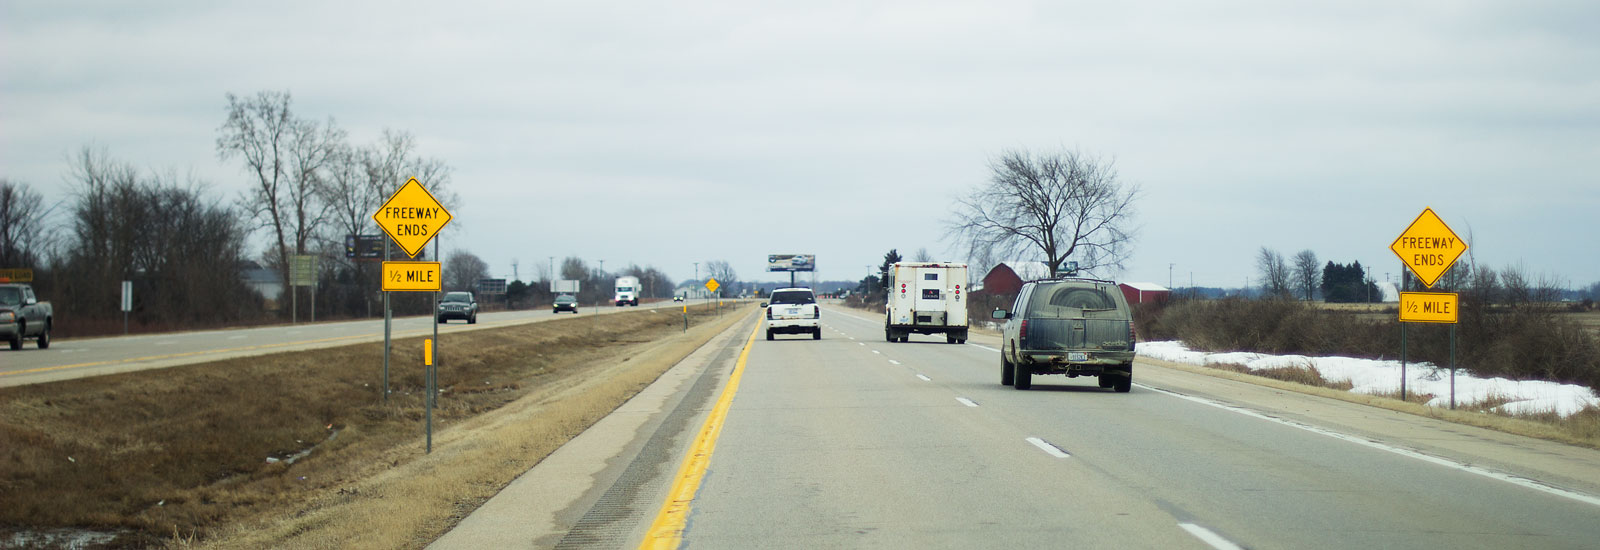 Signs warn motorists that the limited-access freeway ends in 1/2 mile on Southbound US-127 near Ithaca, MI